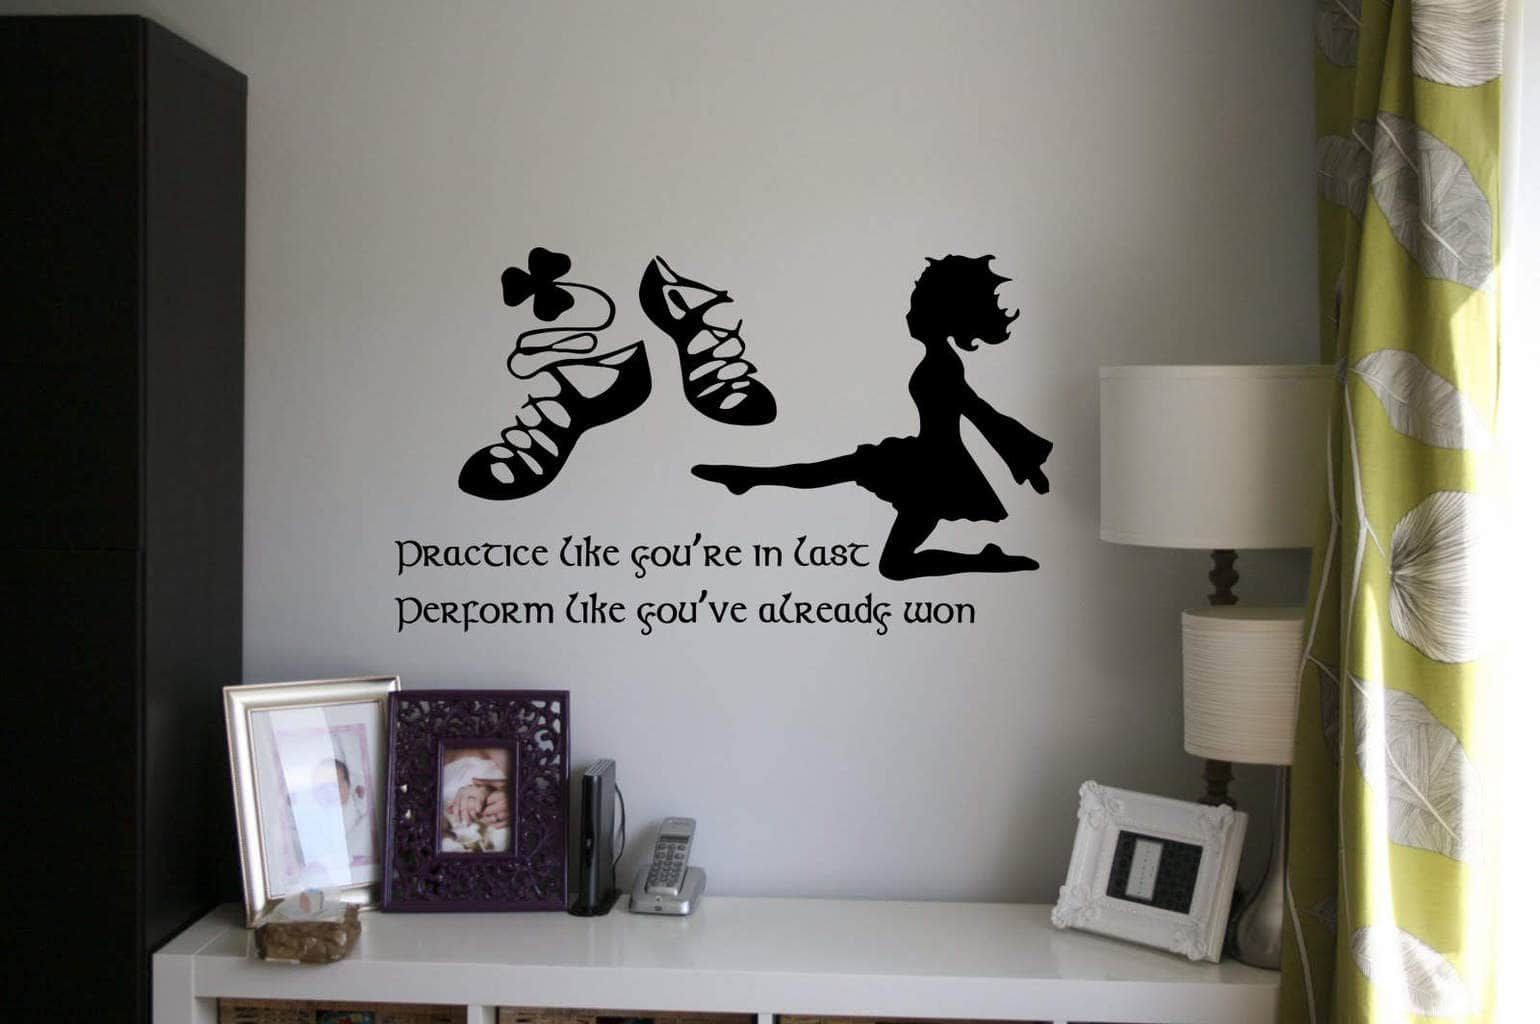 Irish Dance Practice Wall Decal | Wall Decal | Wall Art Decal Within Current Dancing Wall Art (View 15 of 20)